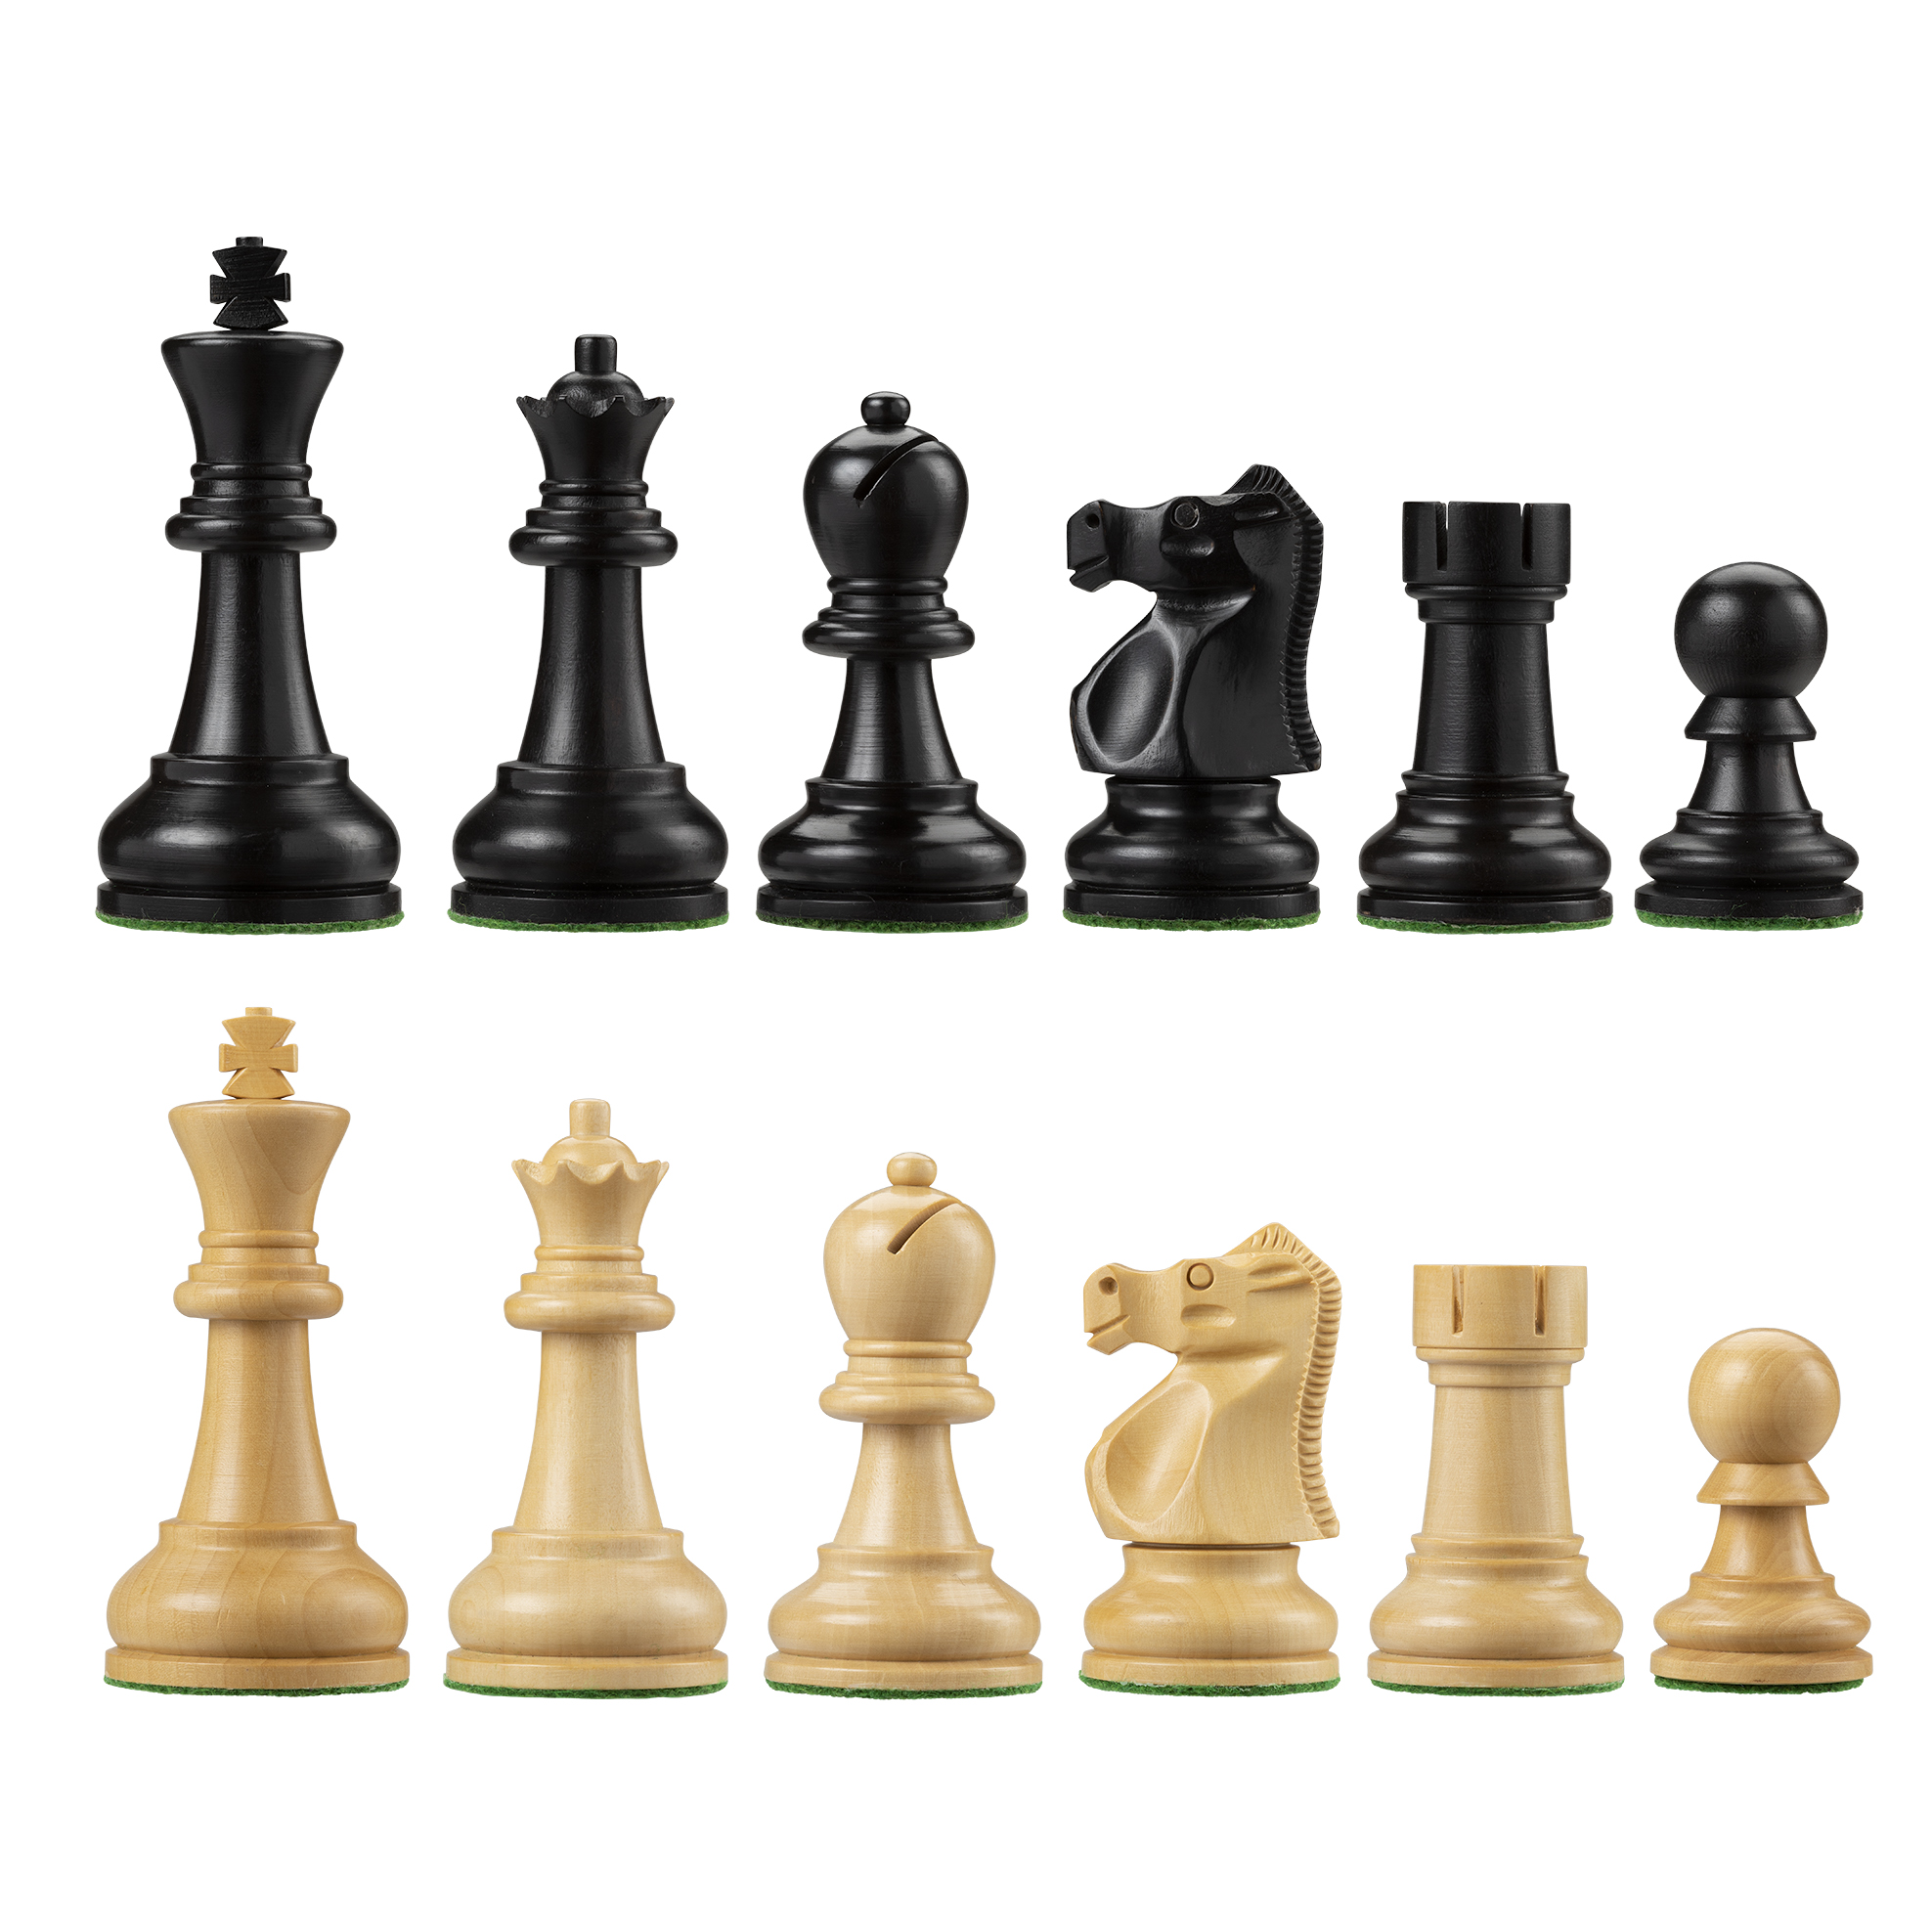 Original Ultimate Chess Pieces? - Chess Forums 